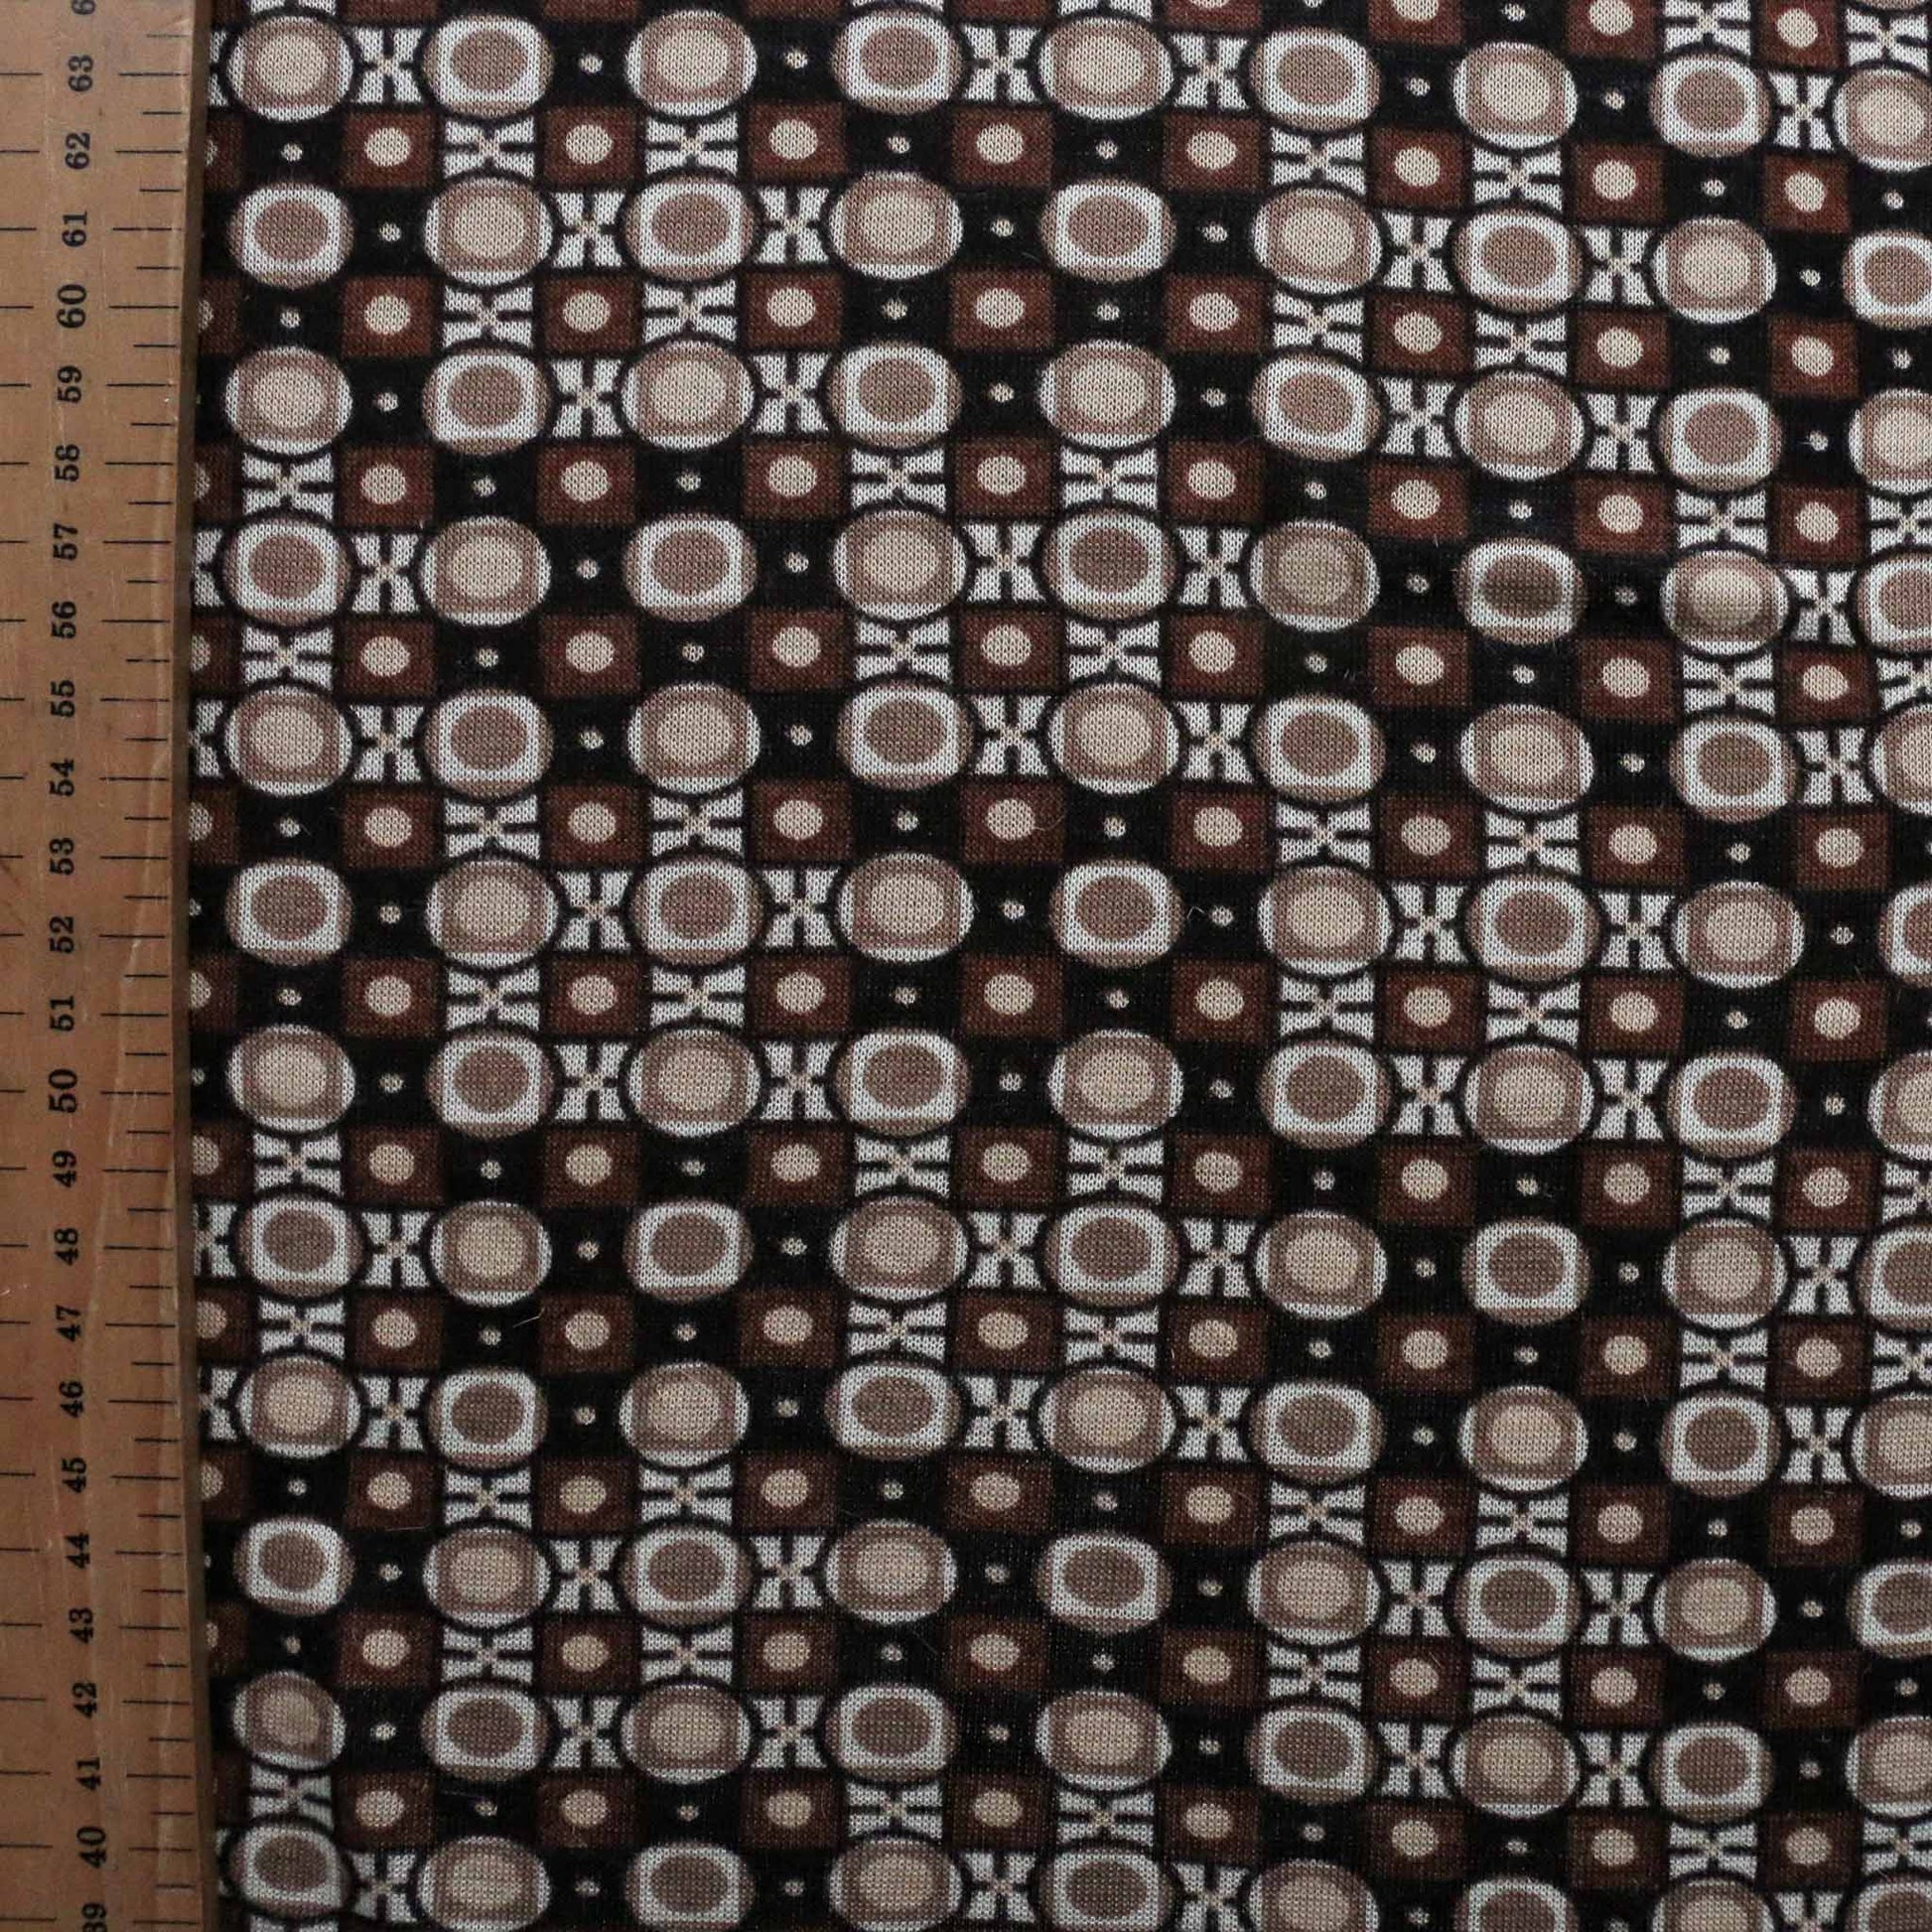 metre sustainable vintage jersey knit brown and black retro printed deadstock dressmaking fabric